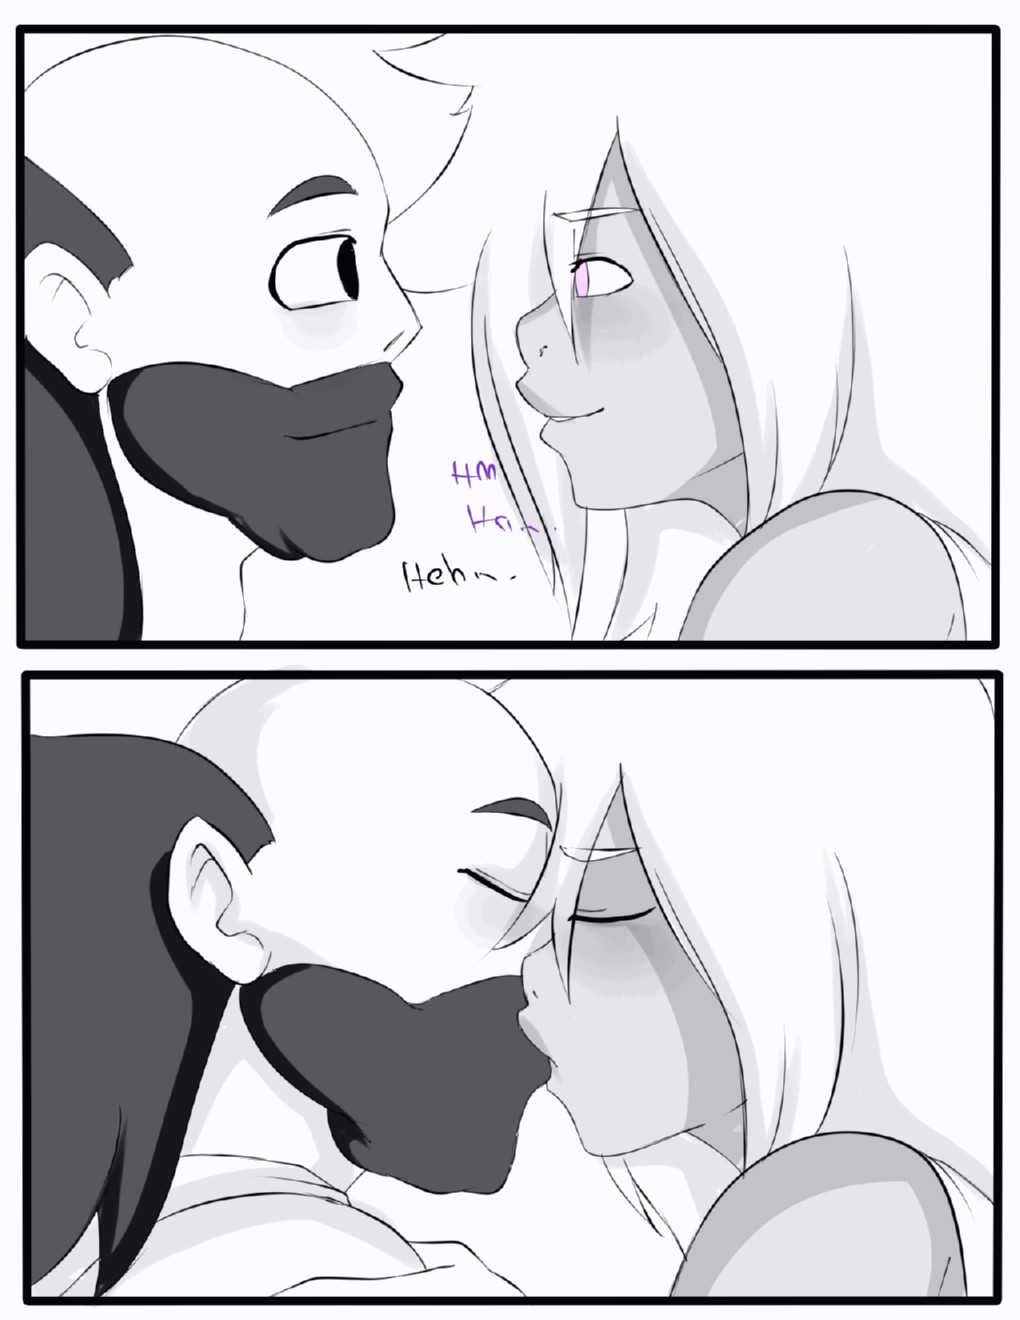 Amethyst's drinking problem porn comic page 007